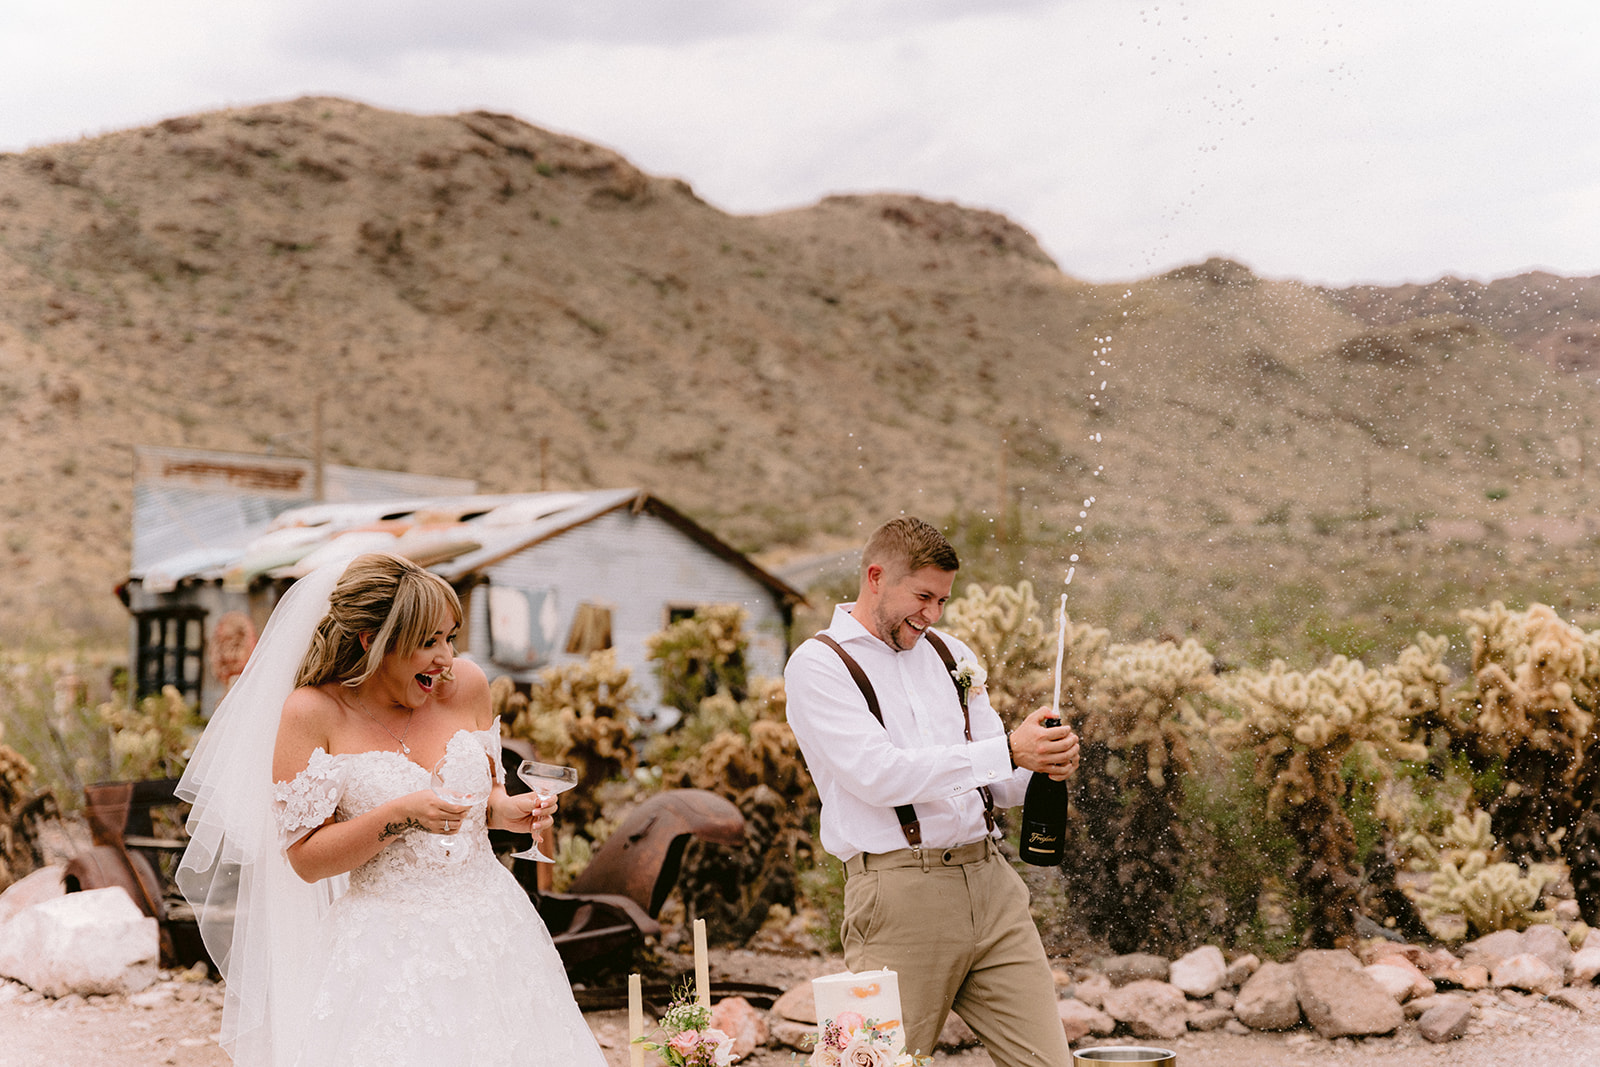 Groom popping open a bottle of champagne as bride looks on during their Nelson Ghost Town wedding reception planned by Elopement Las Vegas